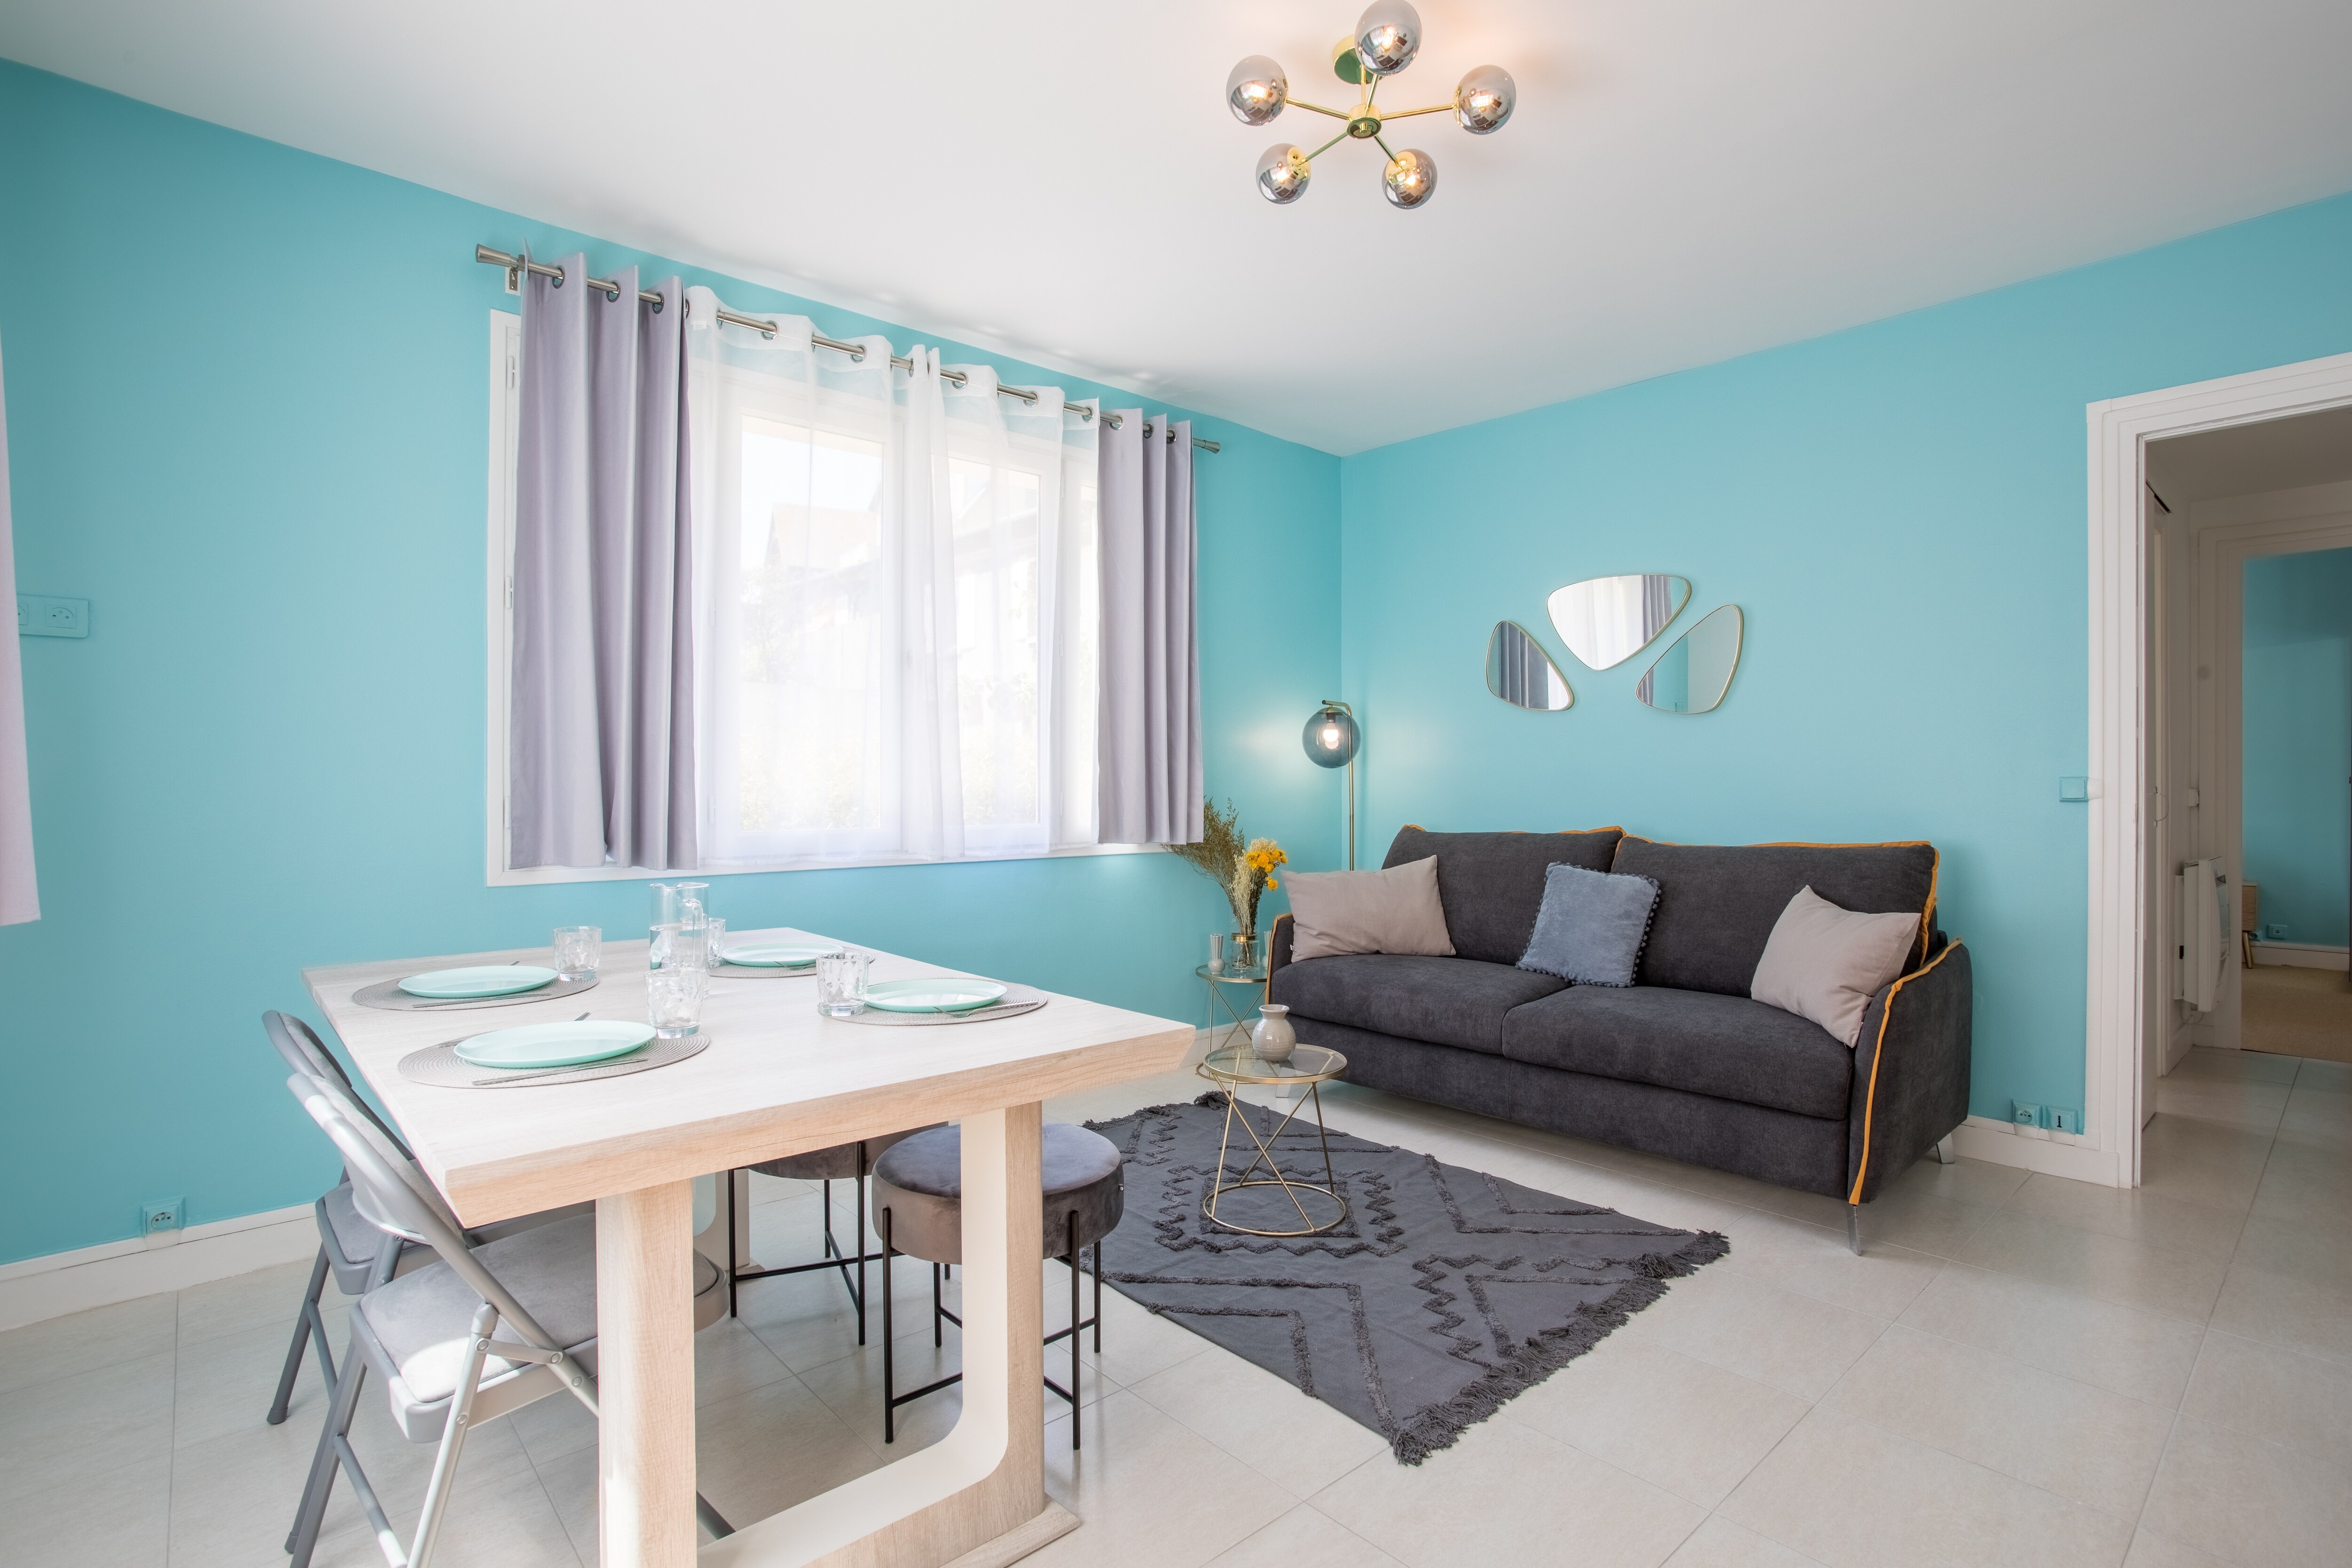 Property Image 2 - Cozy one bedroom flat close to the beach in Deauville